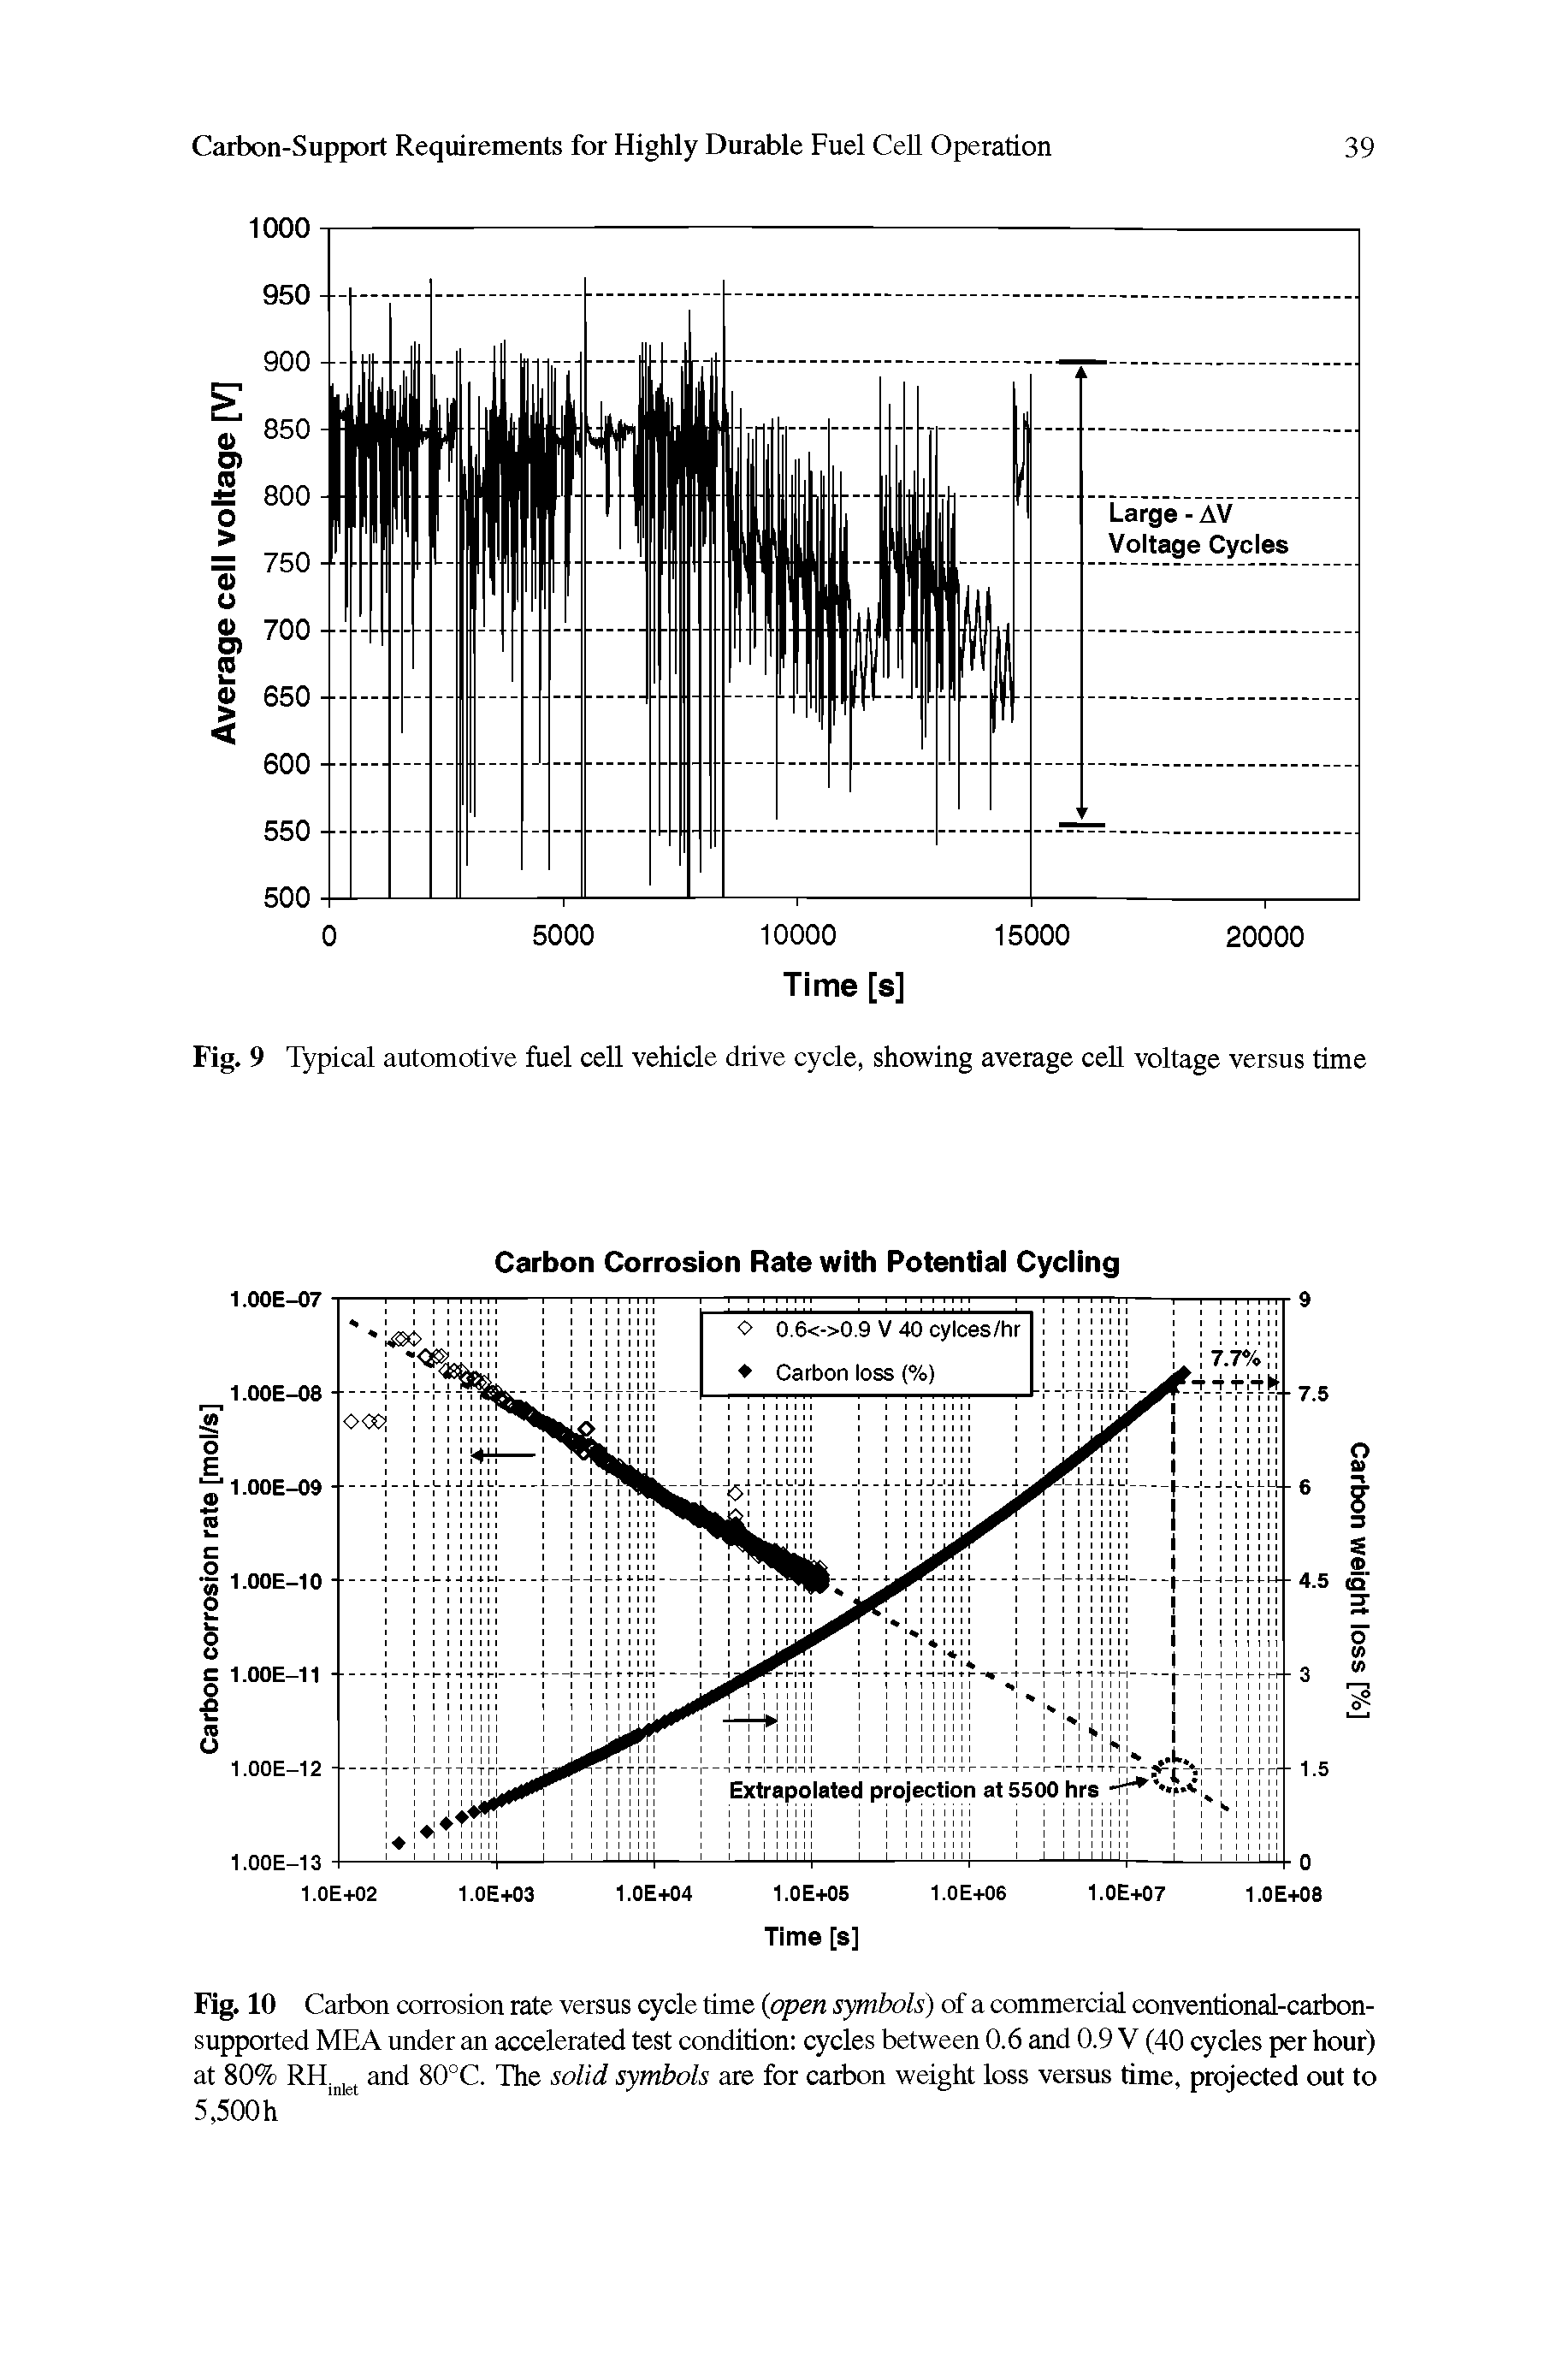 Fig. 10 Carbon corrosion rate versus cycle time open symbols) of a commercial conventional-carbon-supported MEA under an accelerated test condition cycles between 0.6 and 0.9 V (40 cycles per hour) at 80% RH. j and 80°C. The solid symbols are for carbon weight loss versus time, projected out to 5,500h...